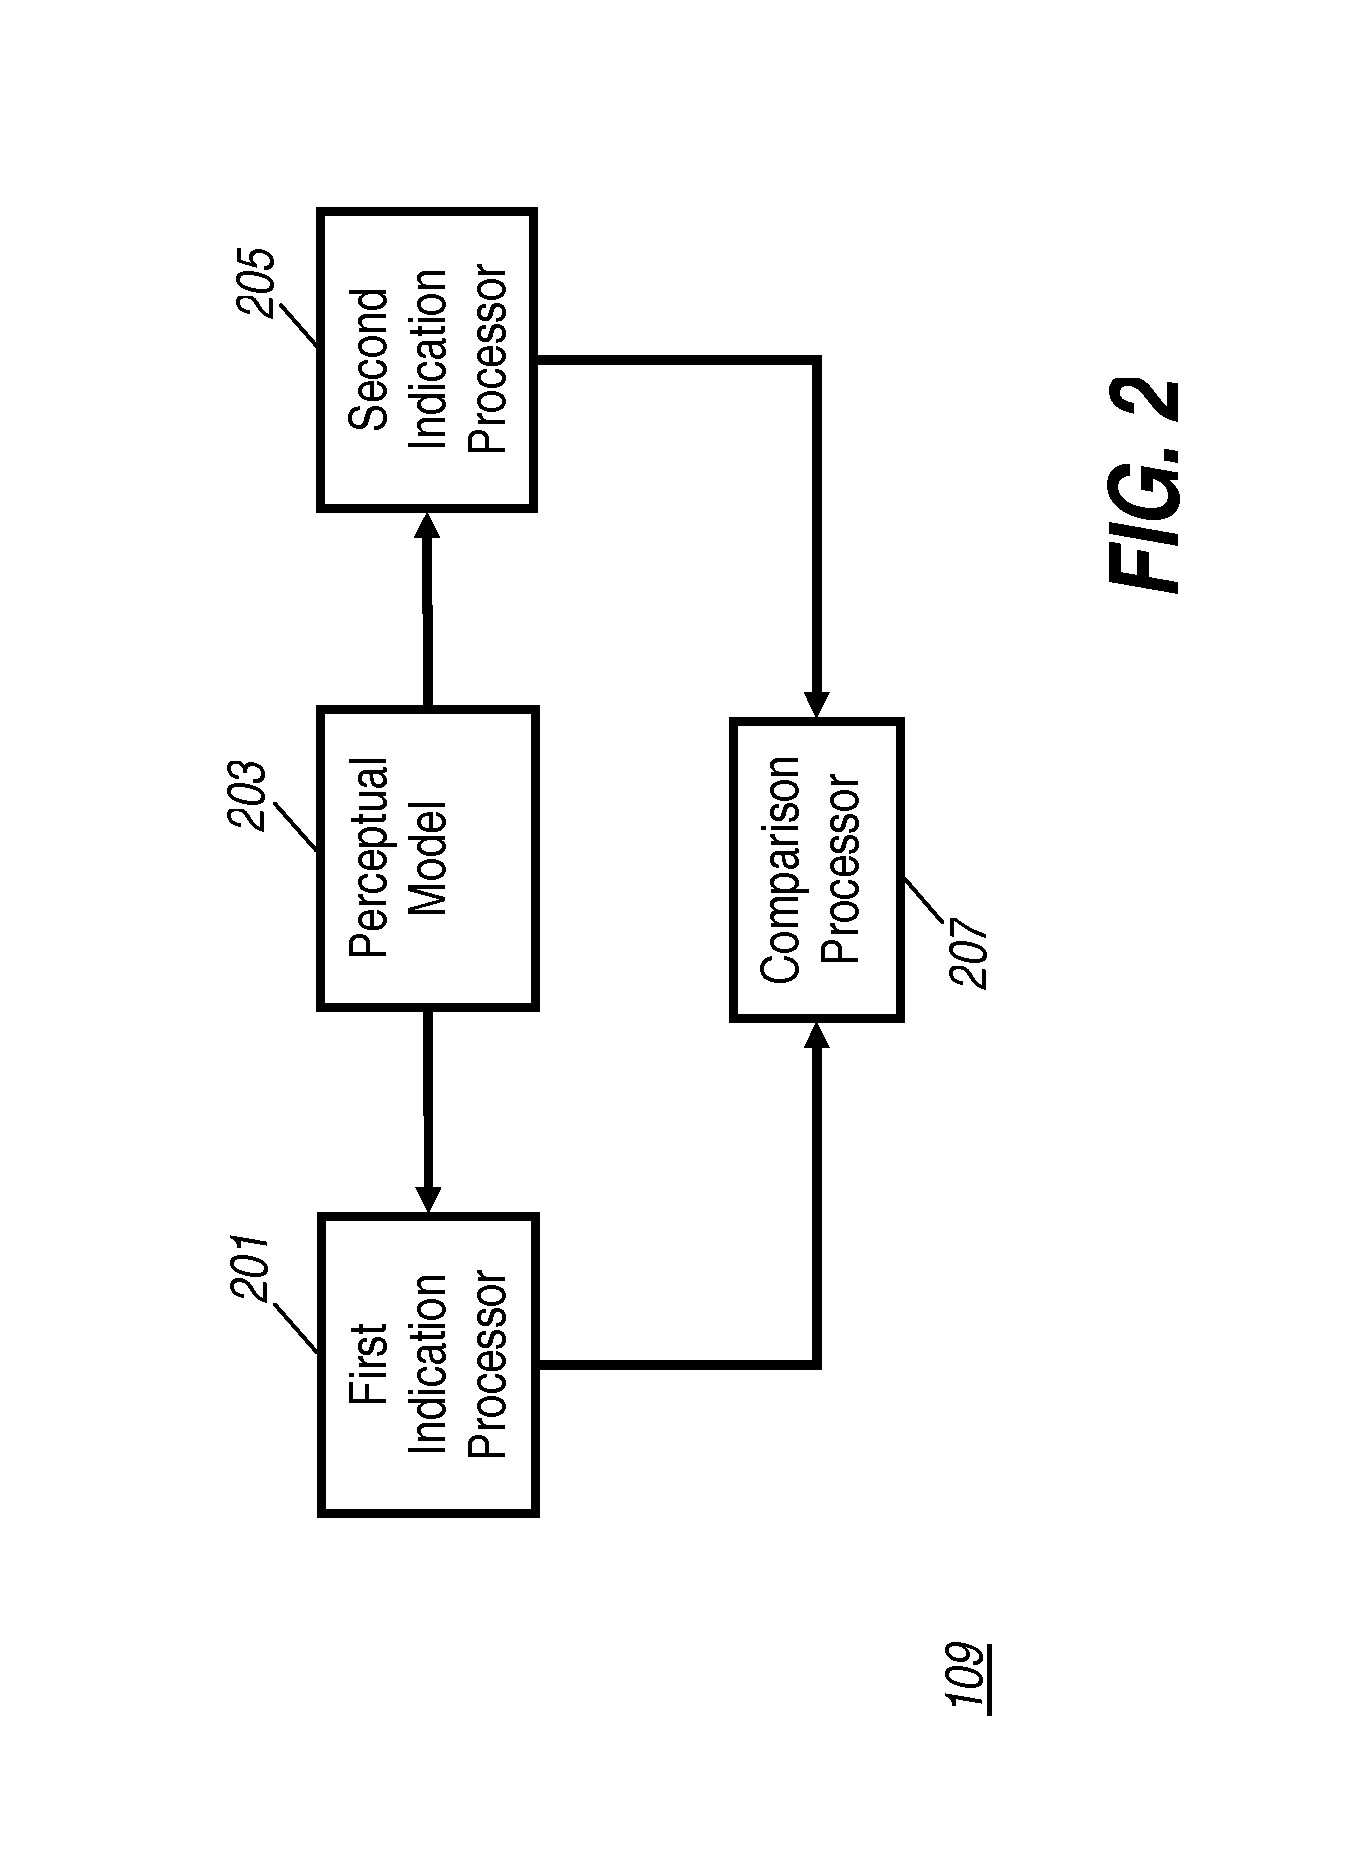 Apparatus and Method for Generating an Output Audio Data Signal